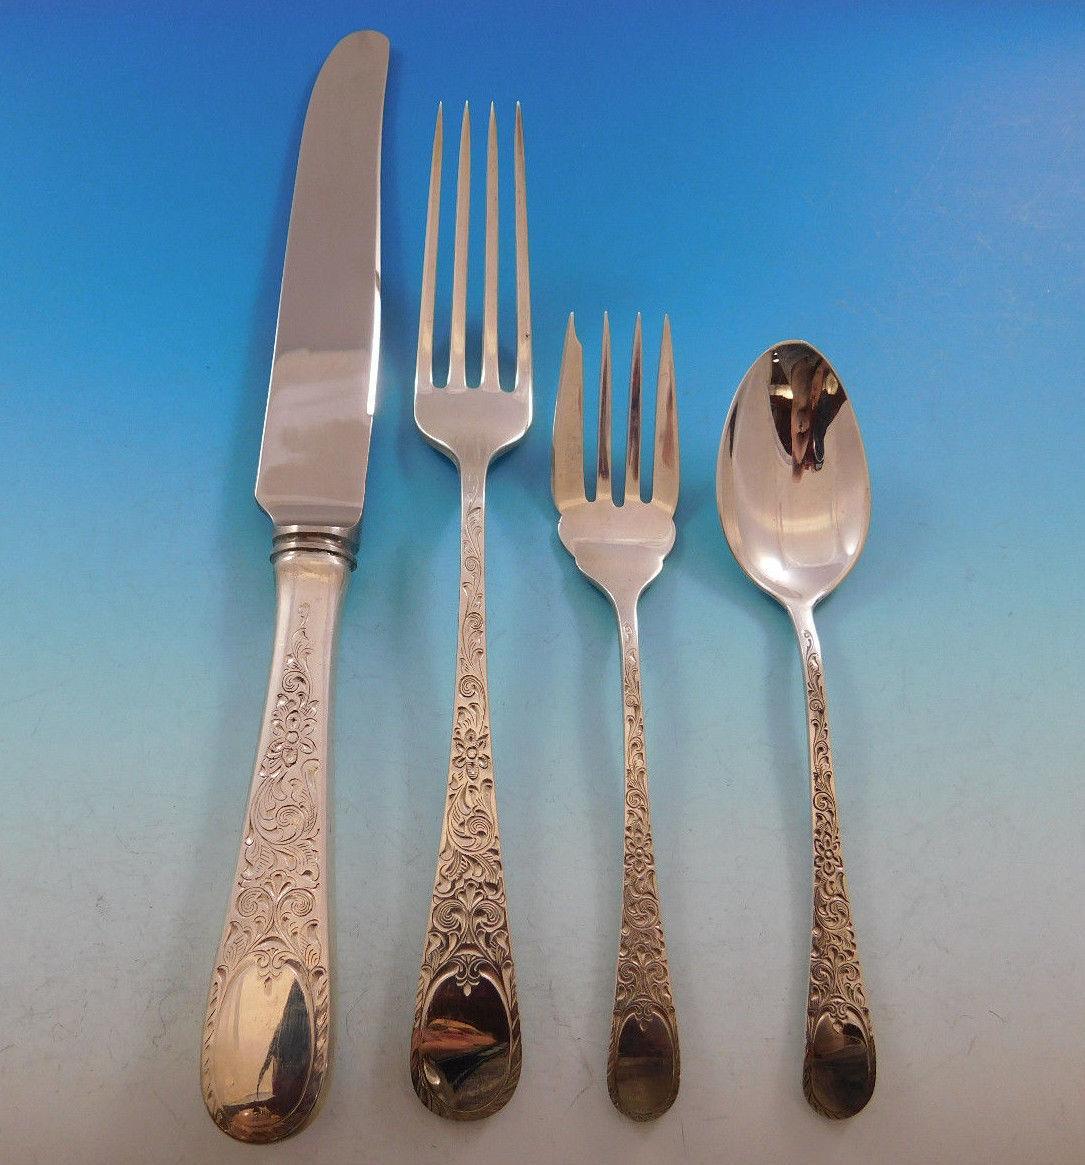 Monumental London Engraved by Birks Canada sterling silver flatware set of 170 pieces. This set includes:

12 dinner knives, 9 3/8